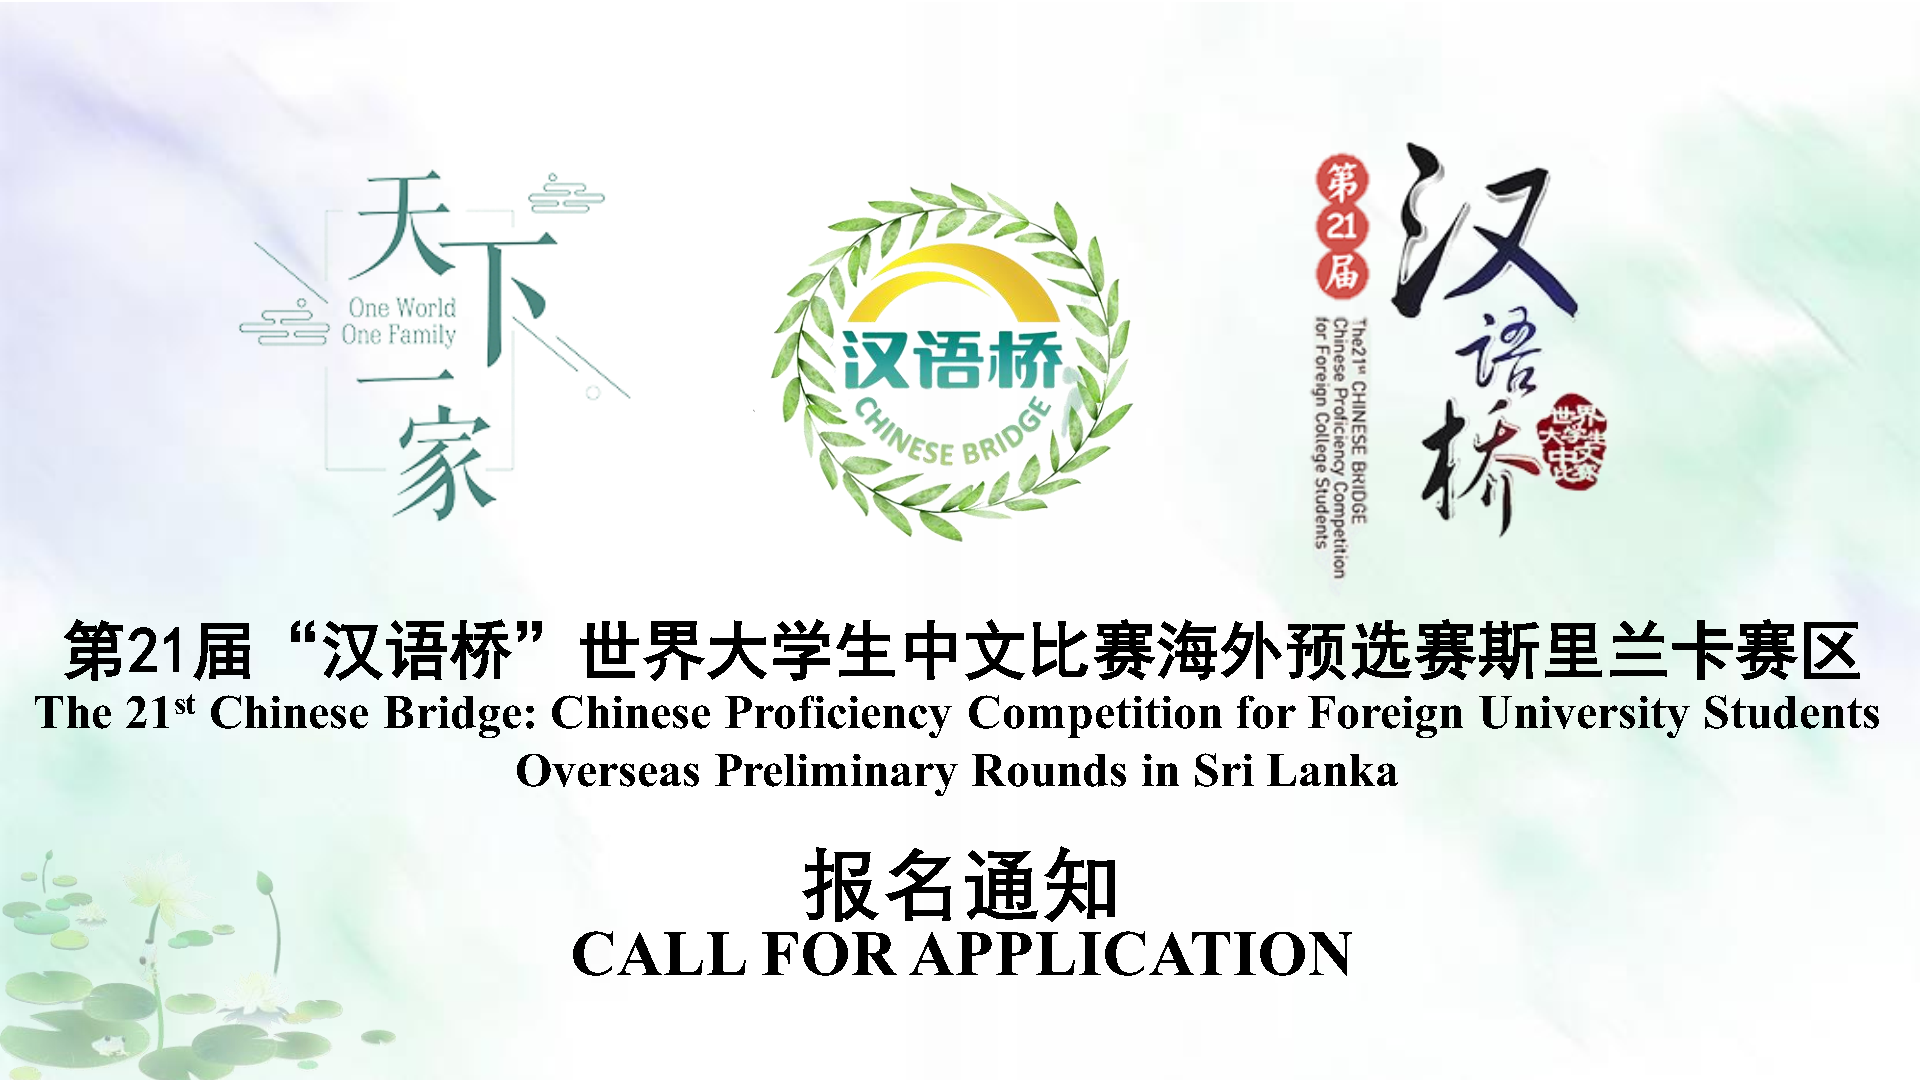 The 21st Chinese Bridge: Chinese Proficiency Competition for Foreign University Students – 2022